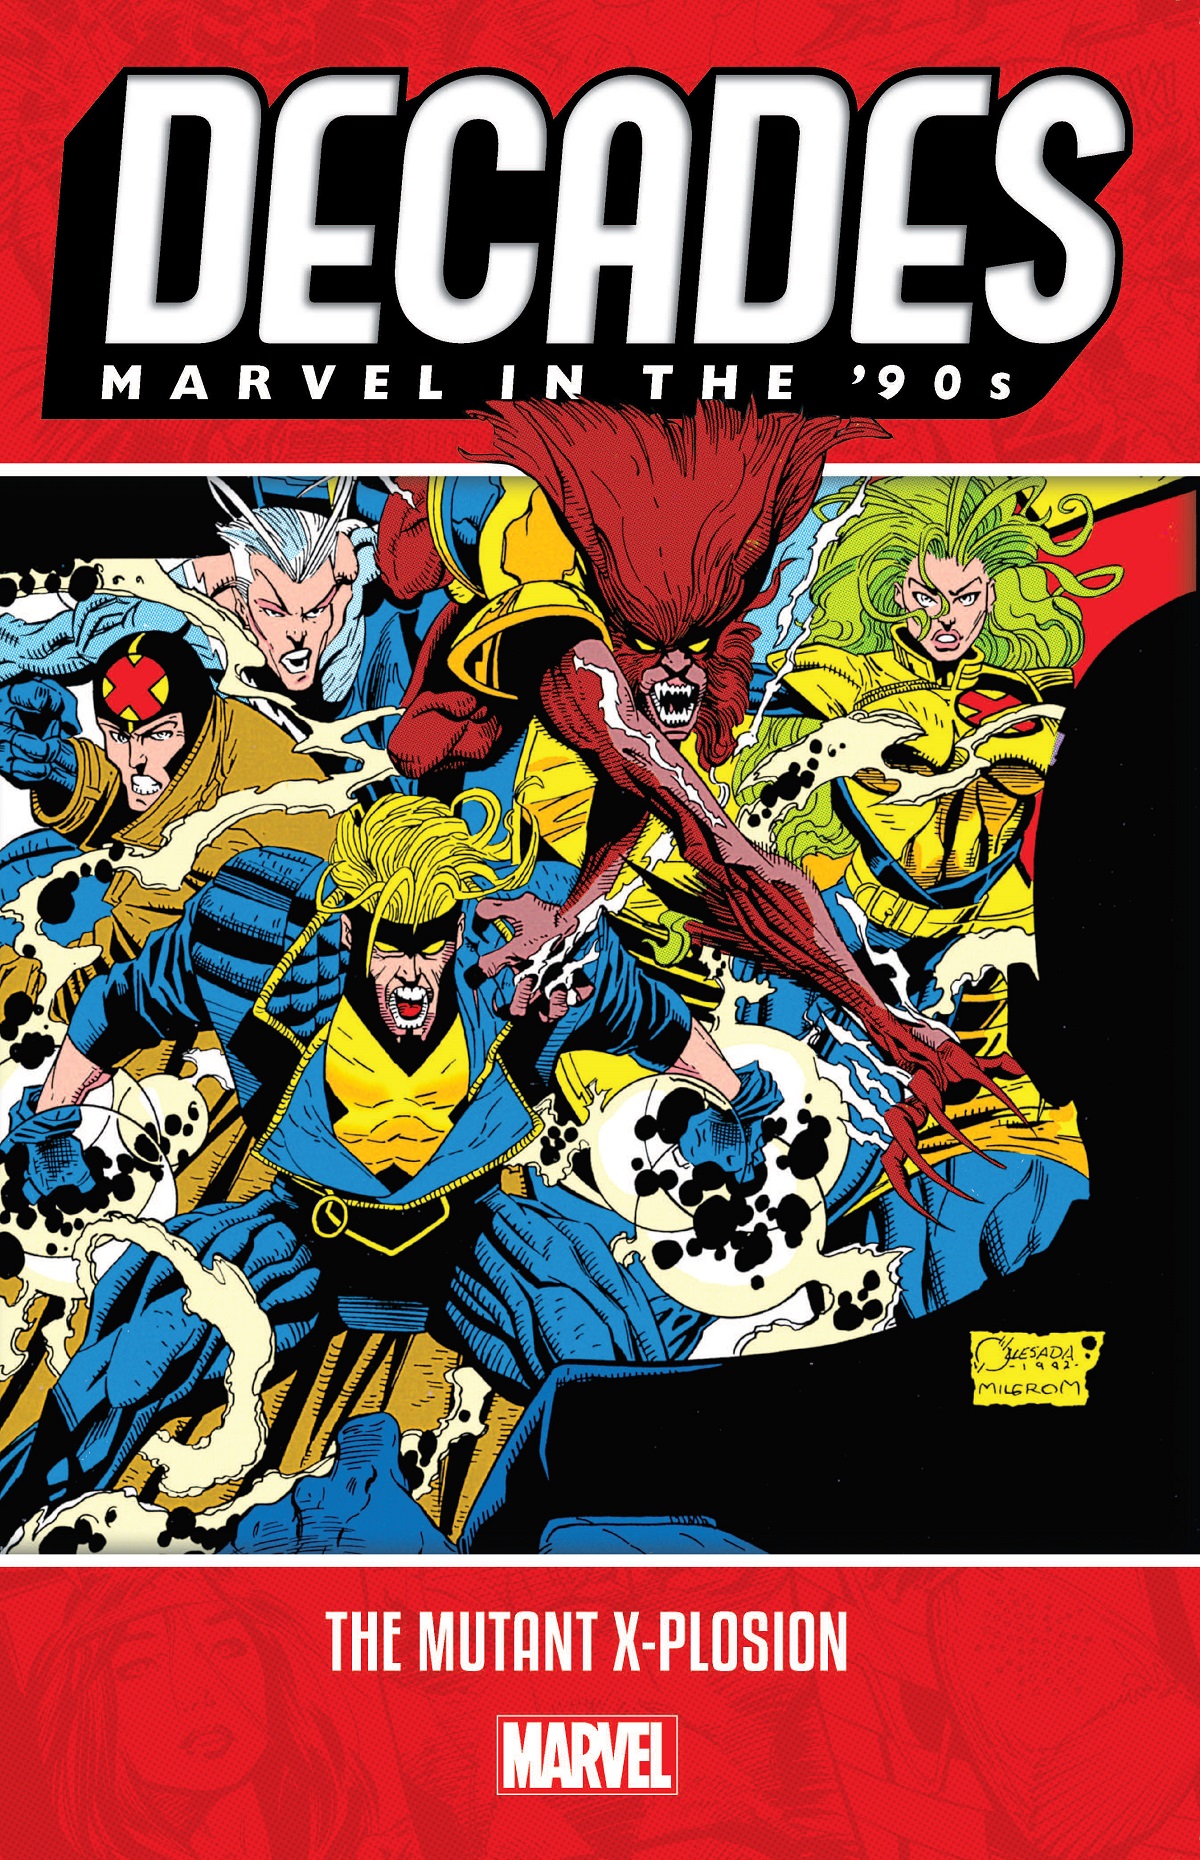 Decades: Marvel In The '90s - The Mutant X-plosion (Trade Paperback)